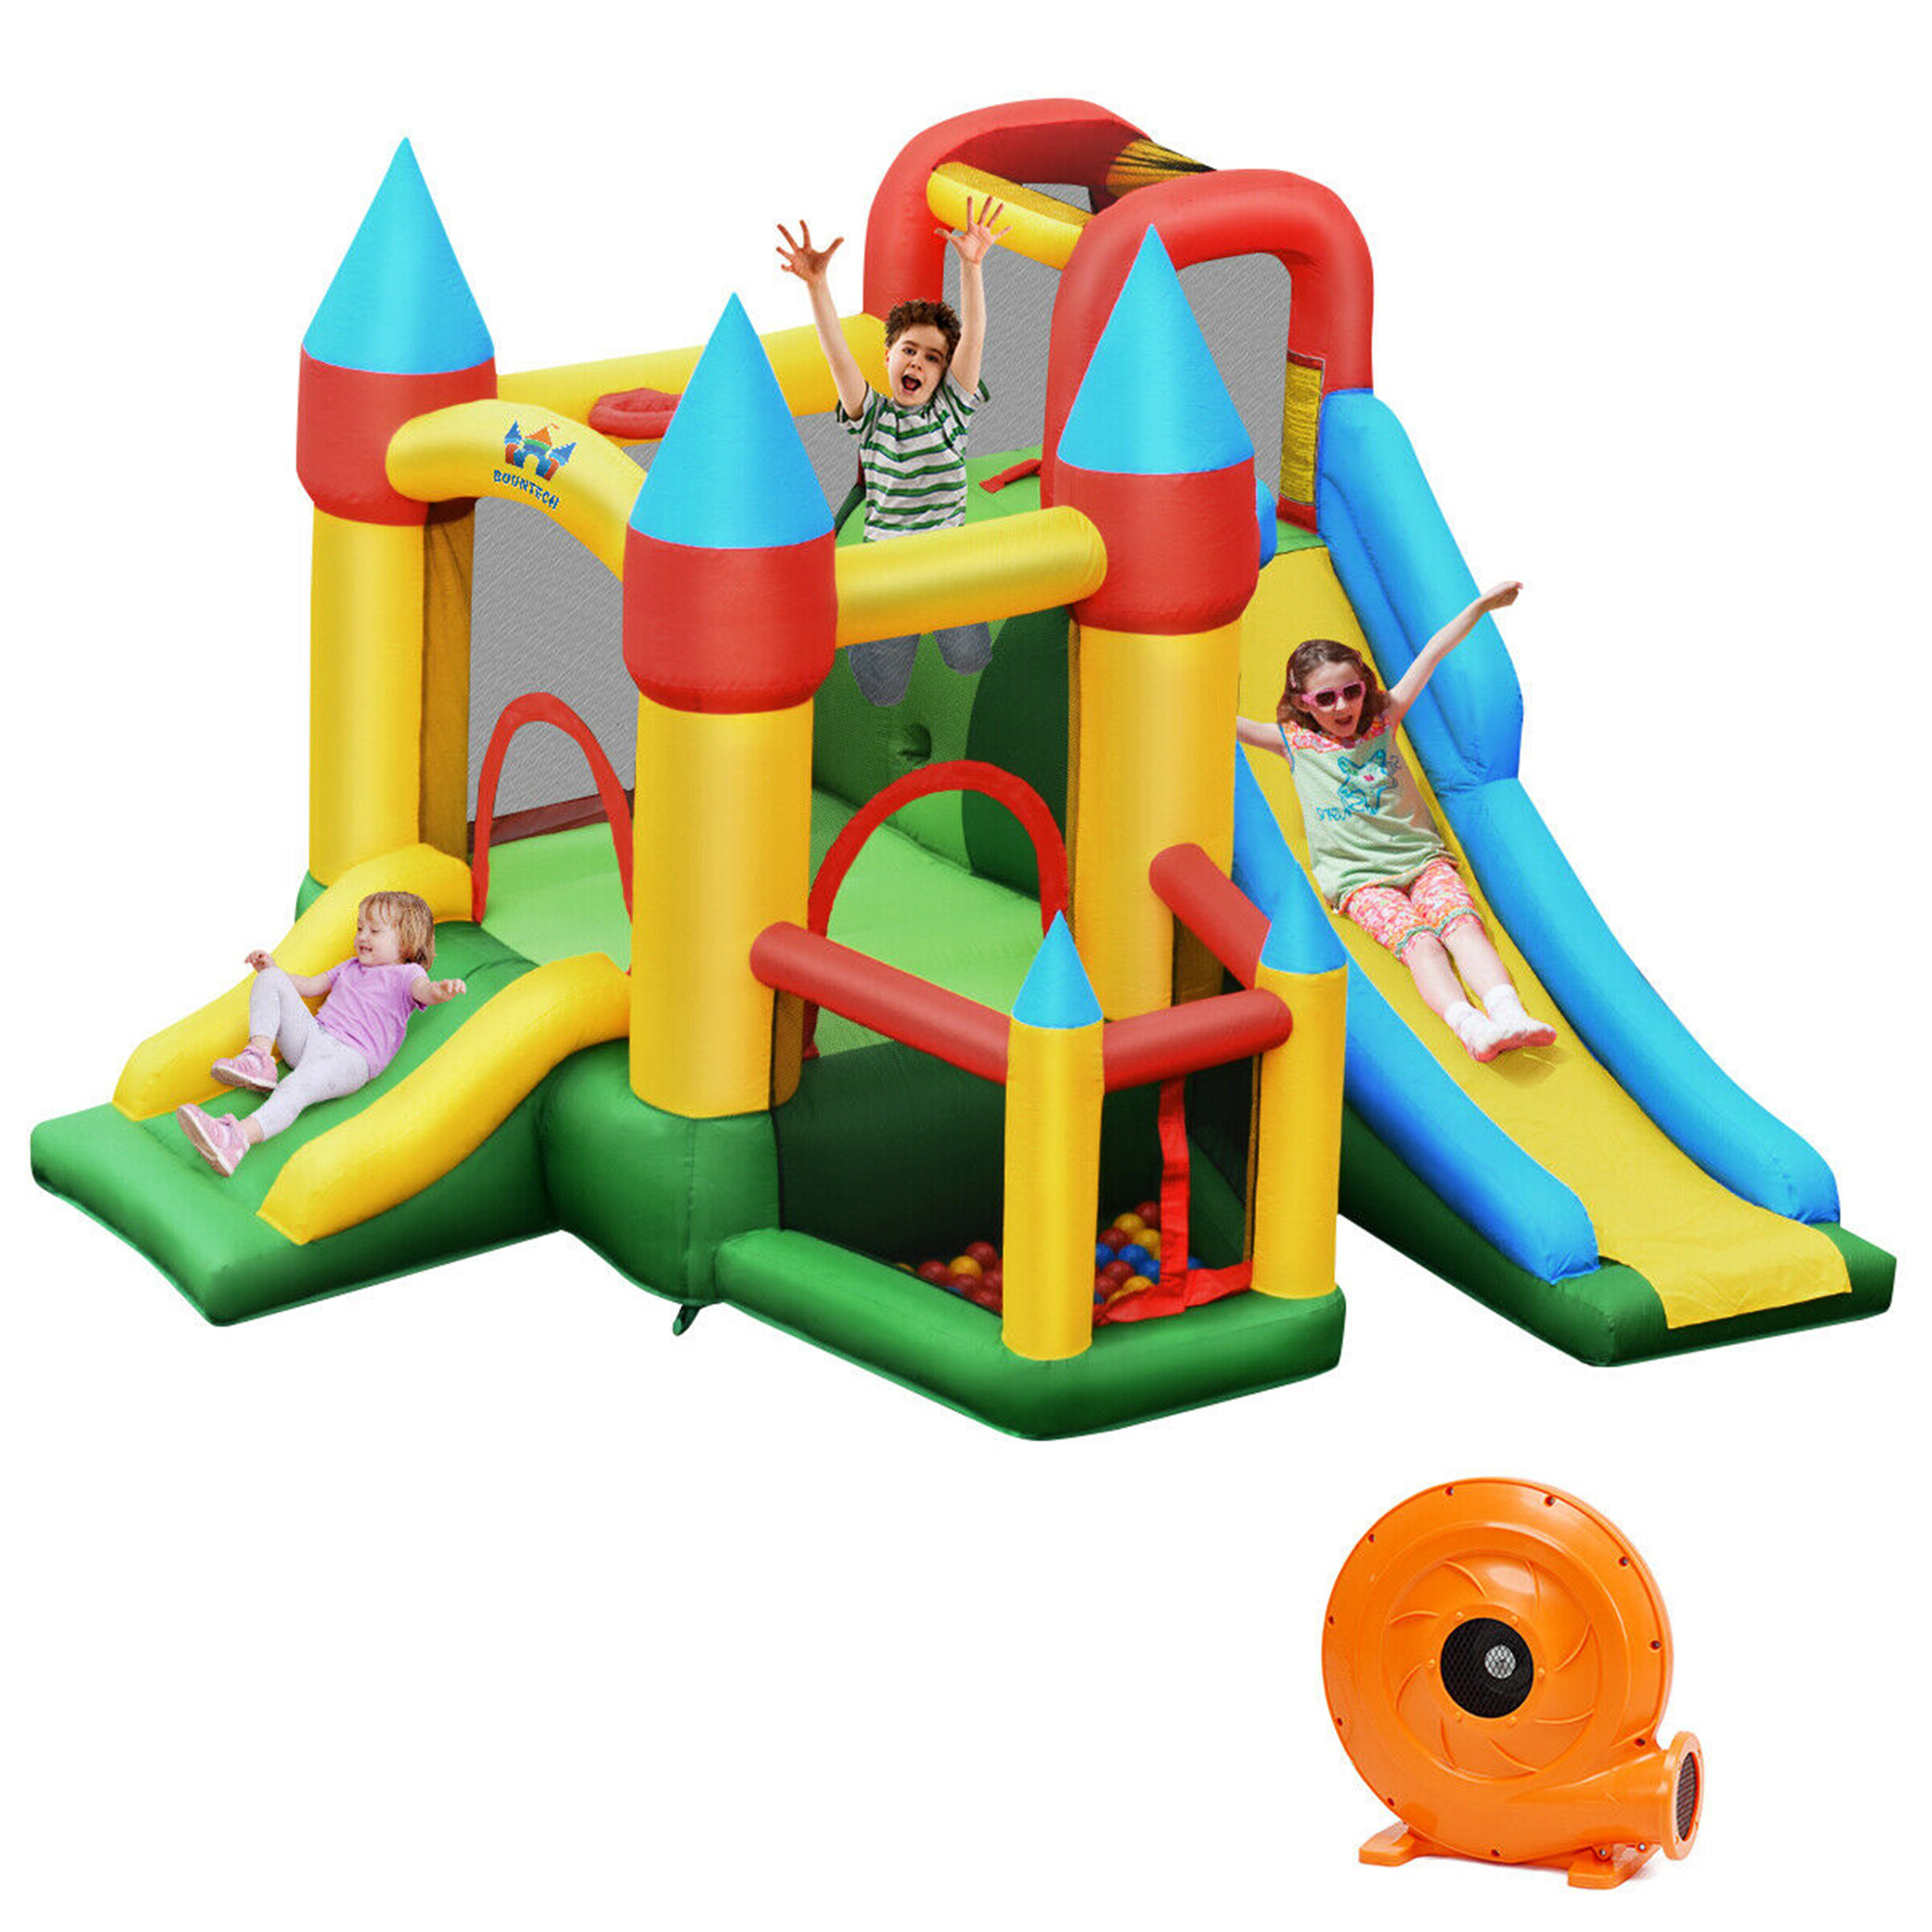 Gymax Kids Inflatable Bounce House Jumping Dual Slide Bouncer Castle W/ 780W Blower - image 1 of 10